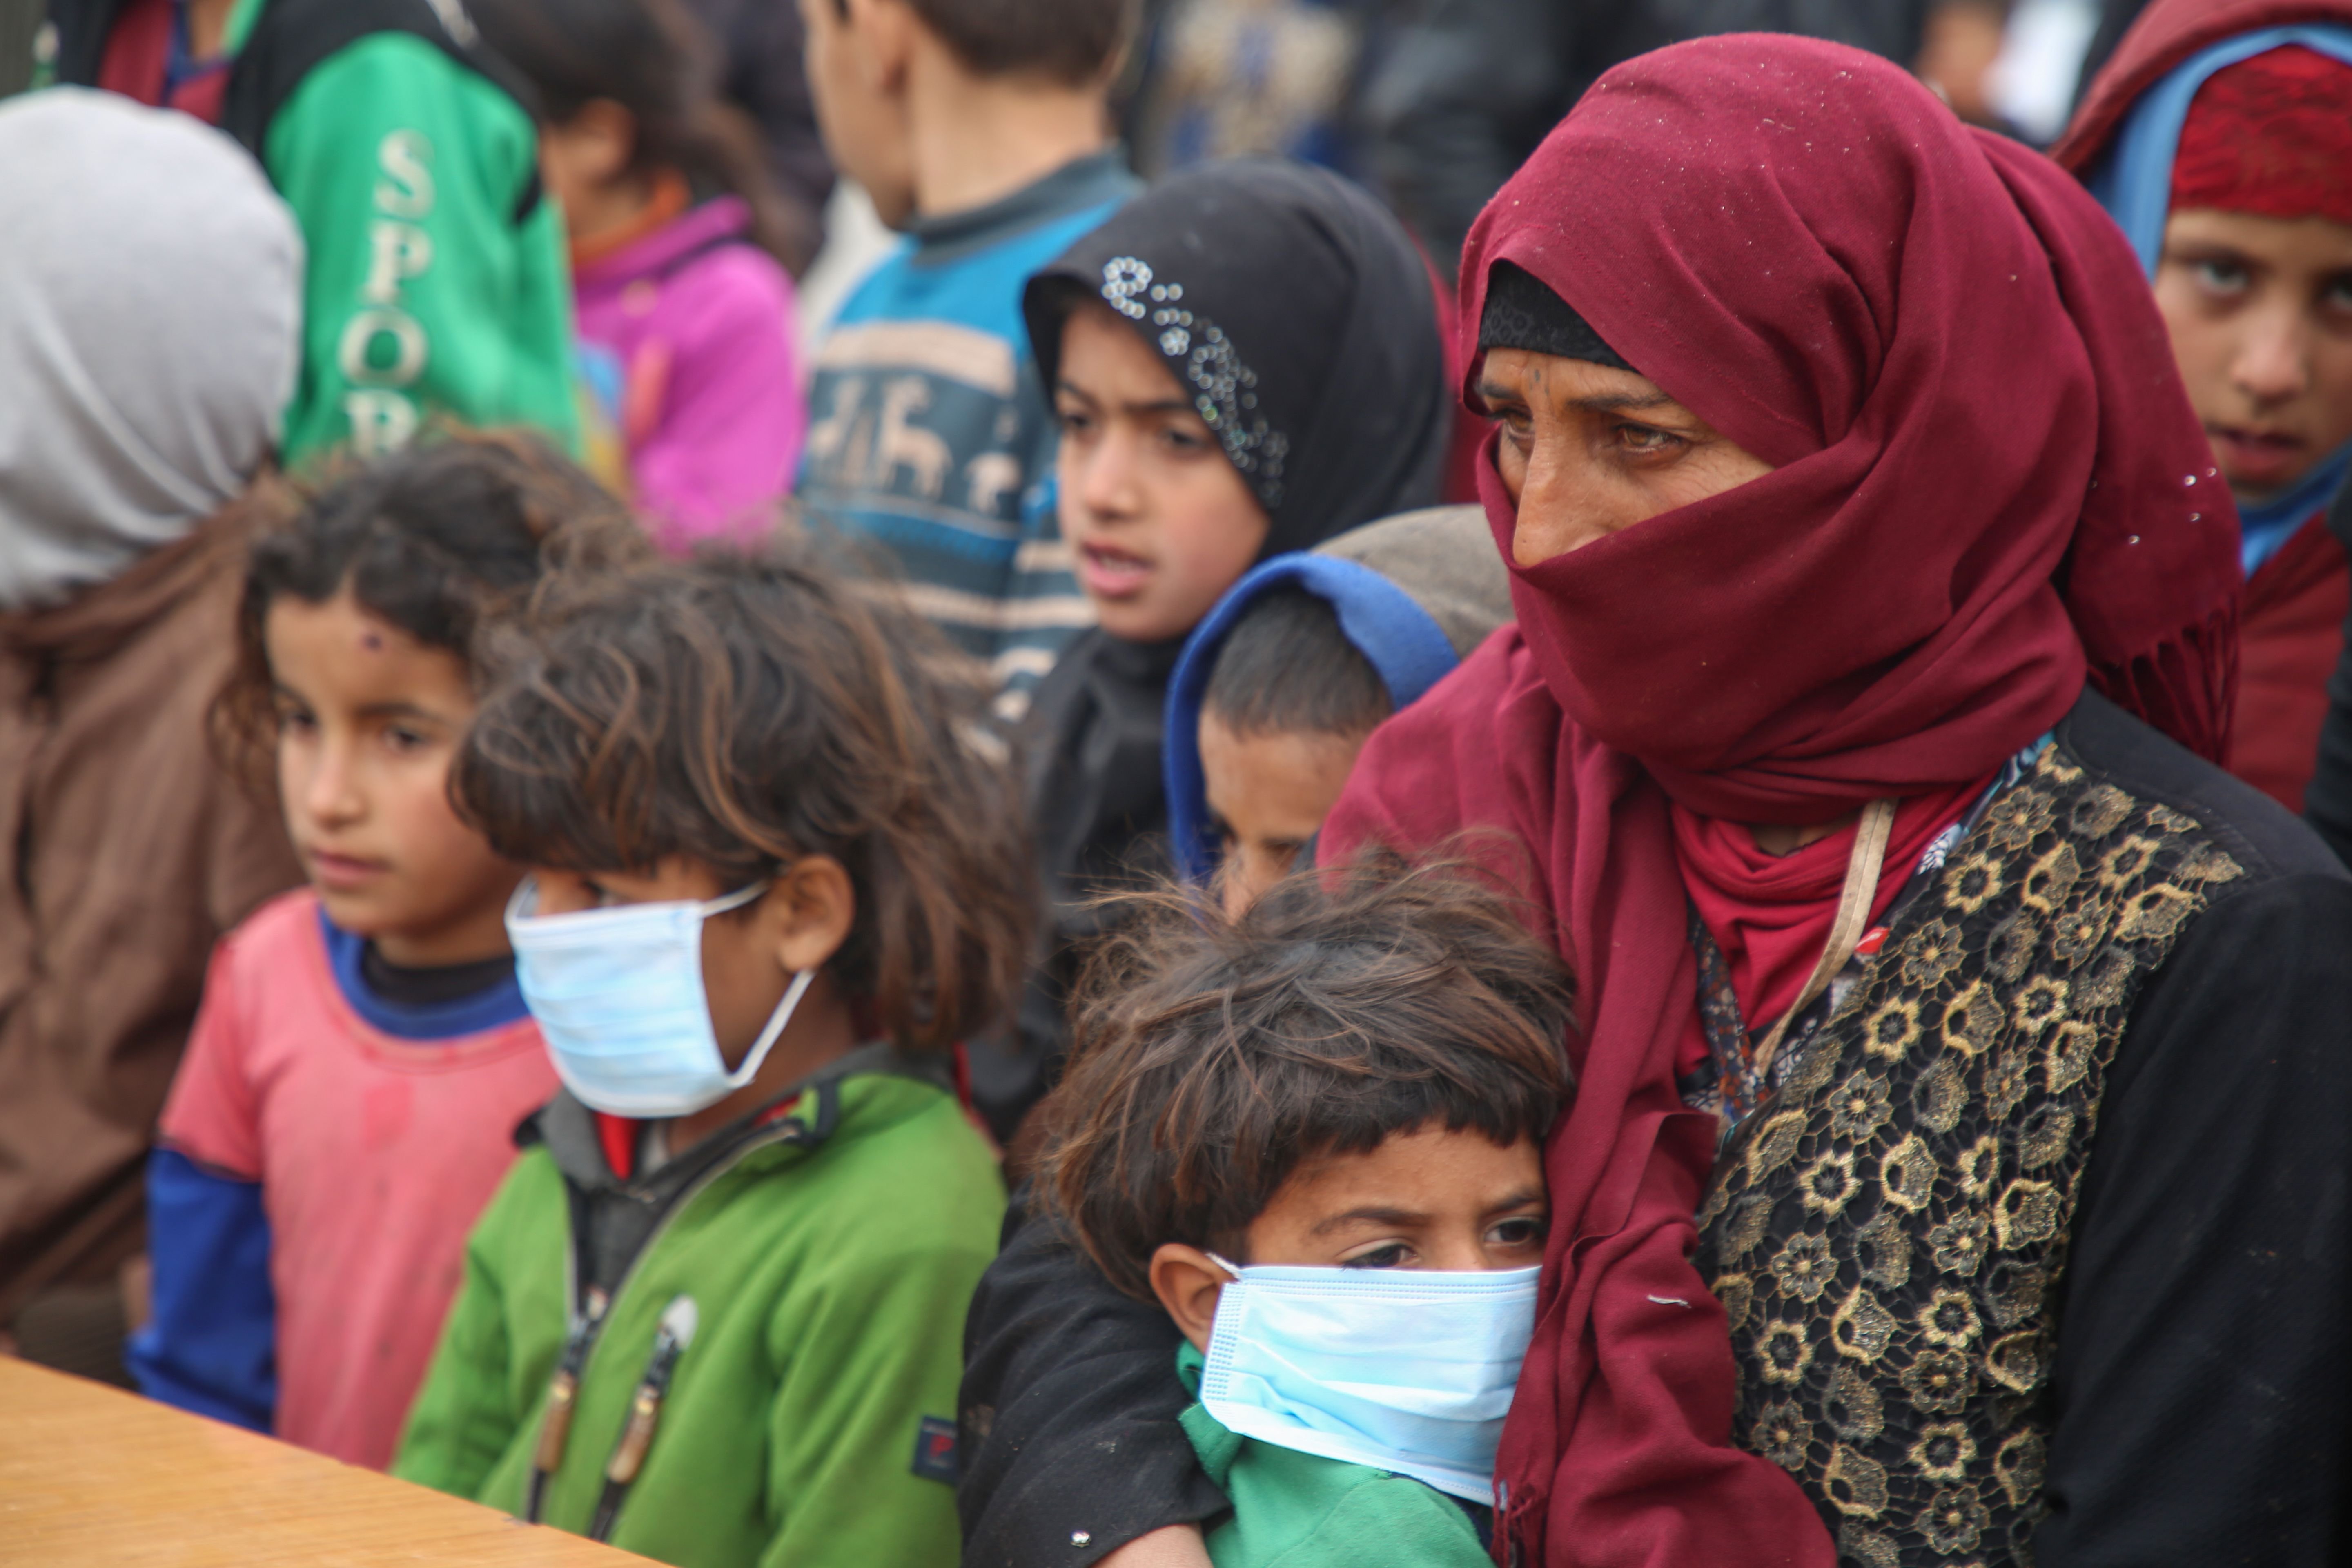 Displaced Syrians, some wearing protective masks, listen as medics hold an awareness campaign on how to be protected against the coronavirus pandemic in a camp for displaced people in Kafr Lusin, in the northwestern province of Idlib, following heavy storms, Wednesday, March 18, 2020. (AFP Photo)